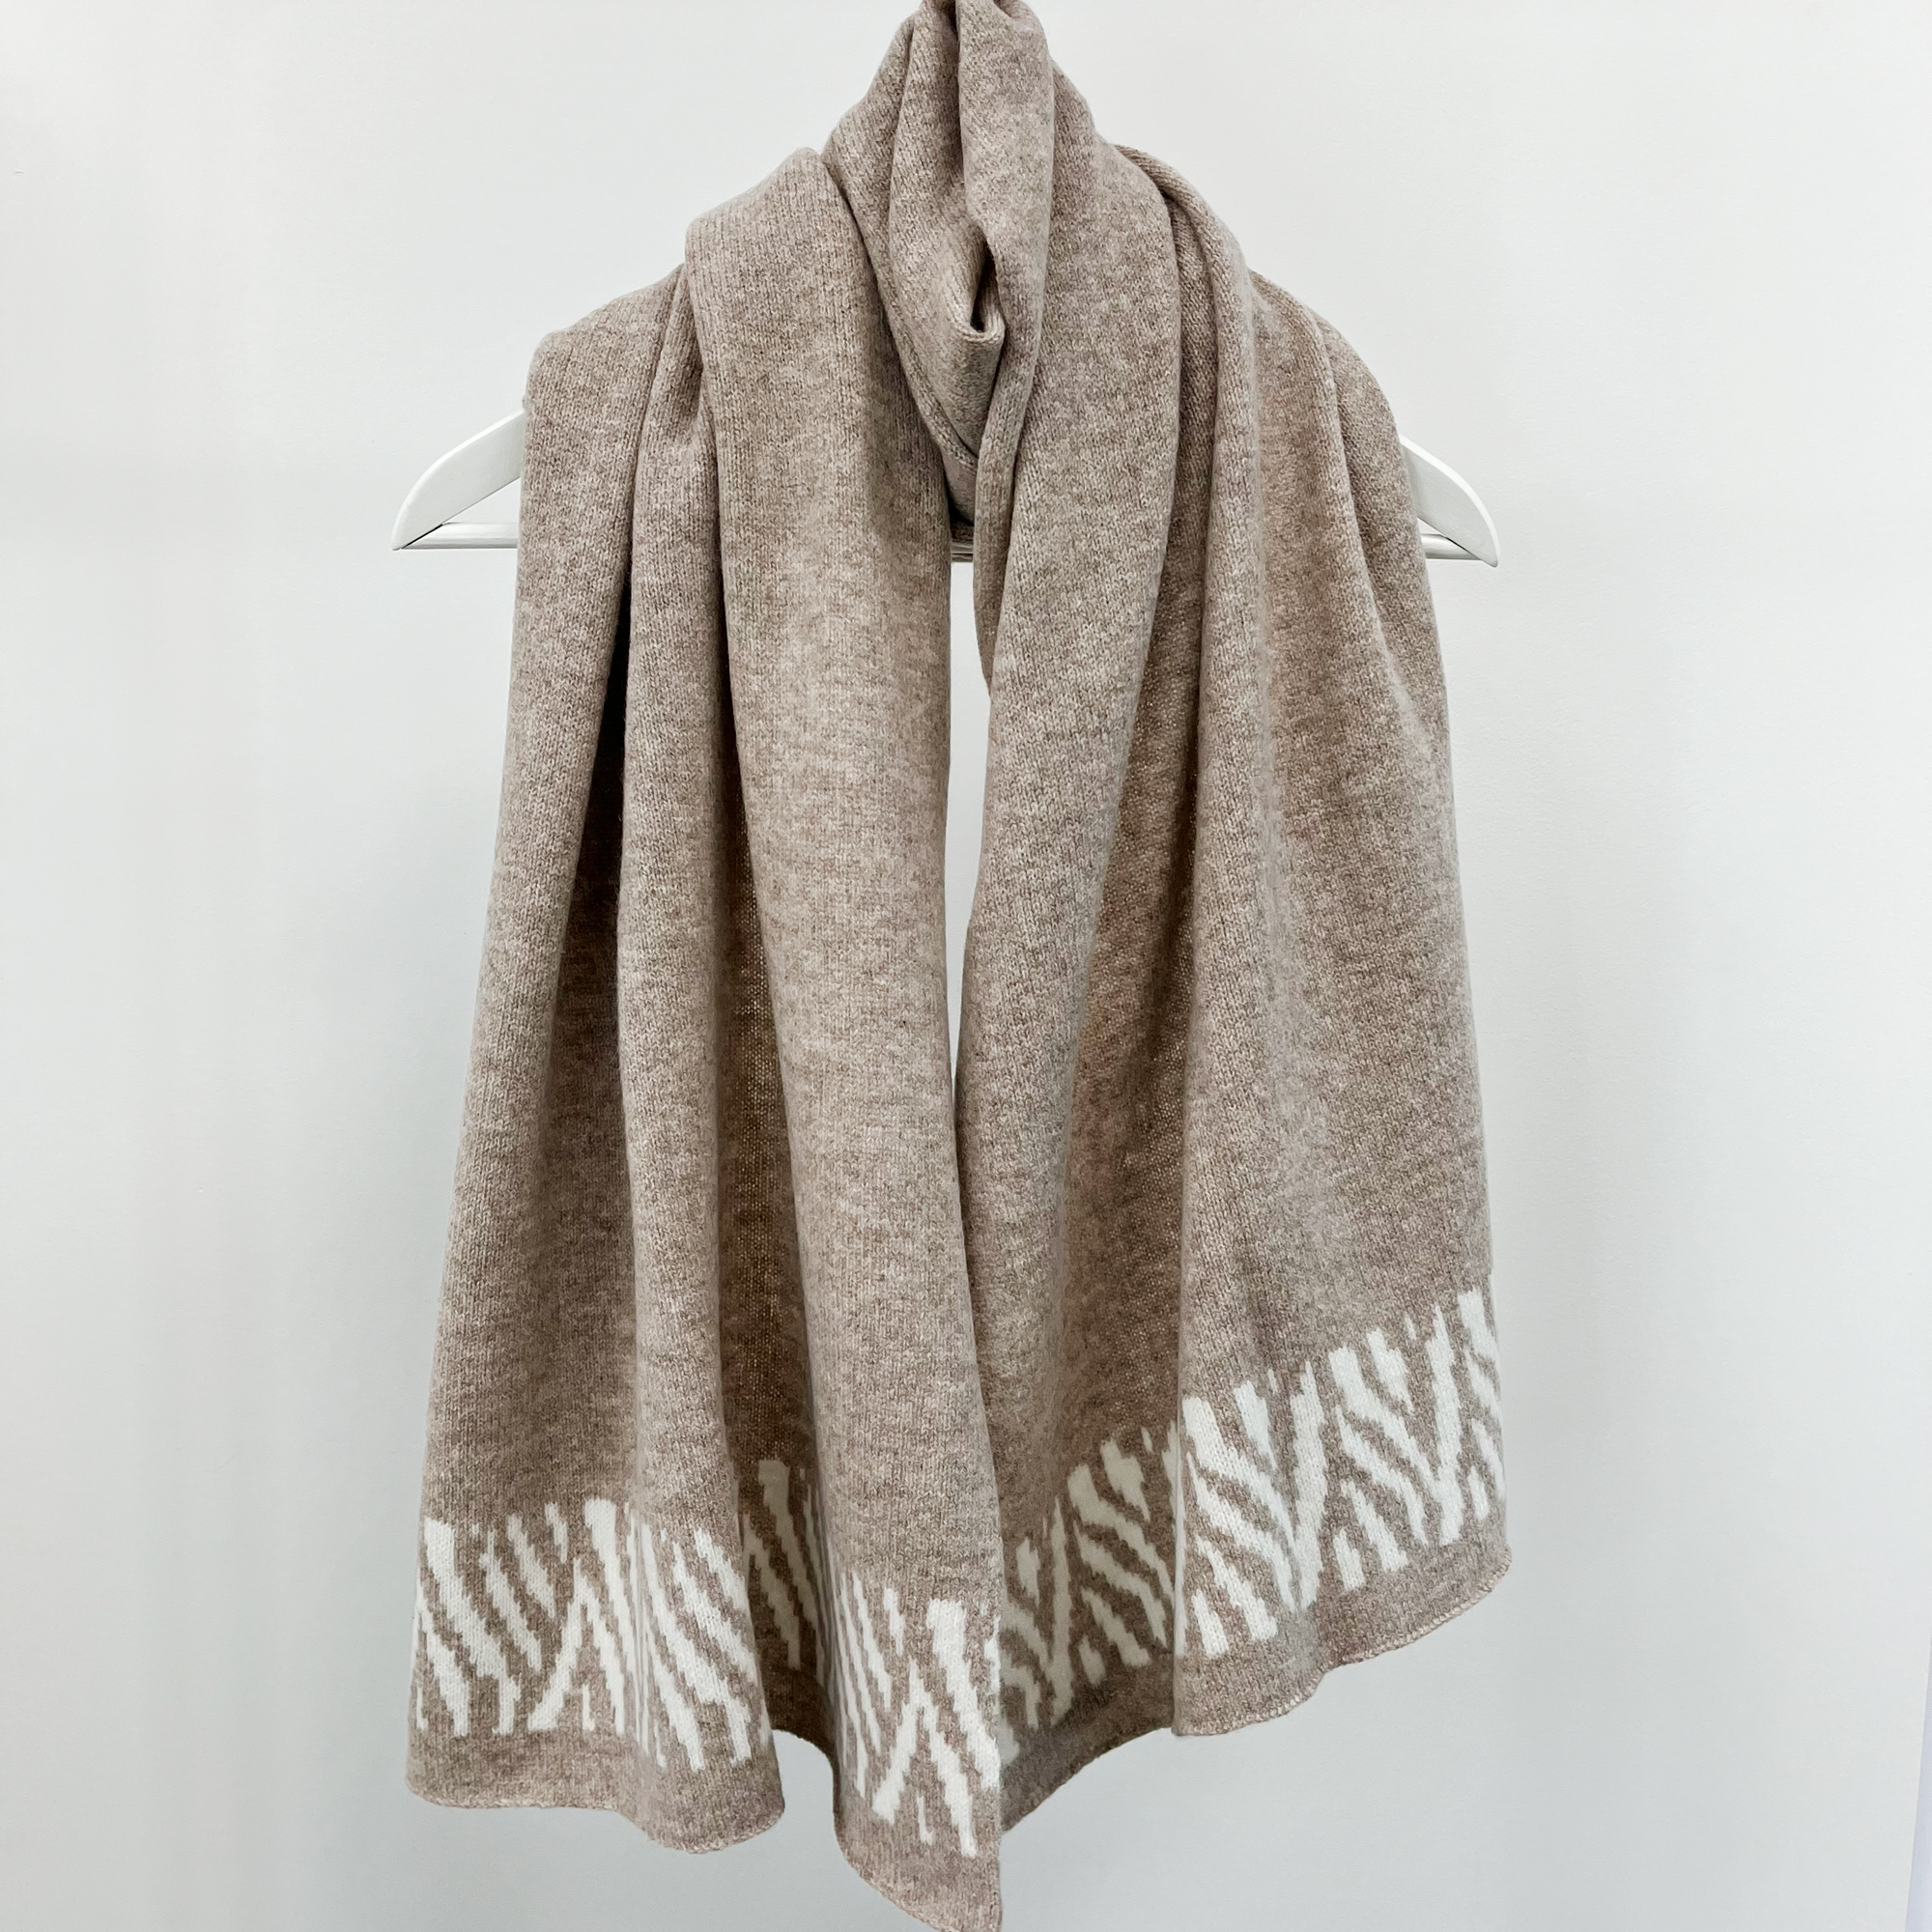 Zebra knitted wrap - cobble and white (MADE TO ORDER)